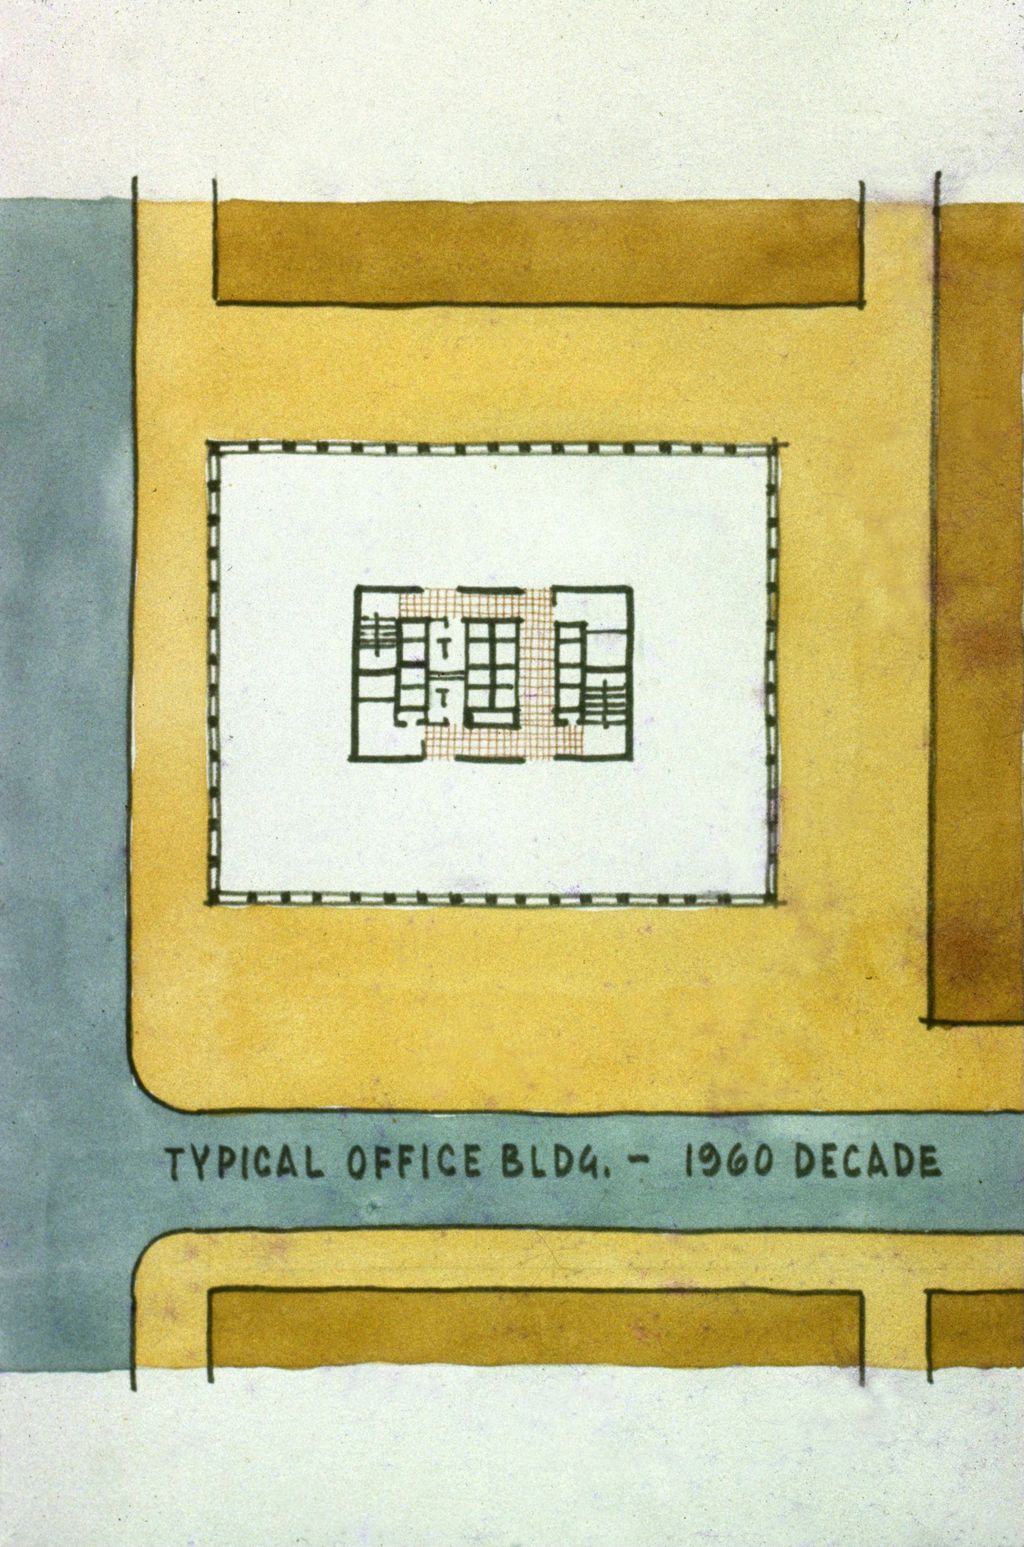 Plan of a typical office building of the 1960s